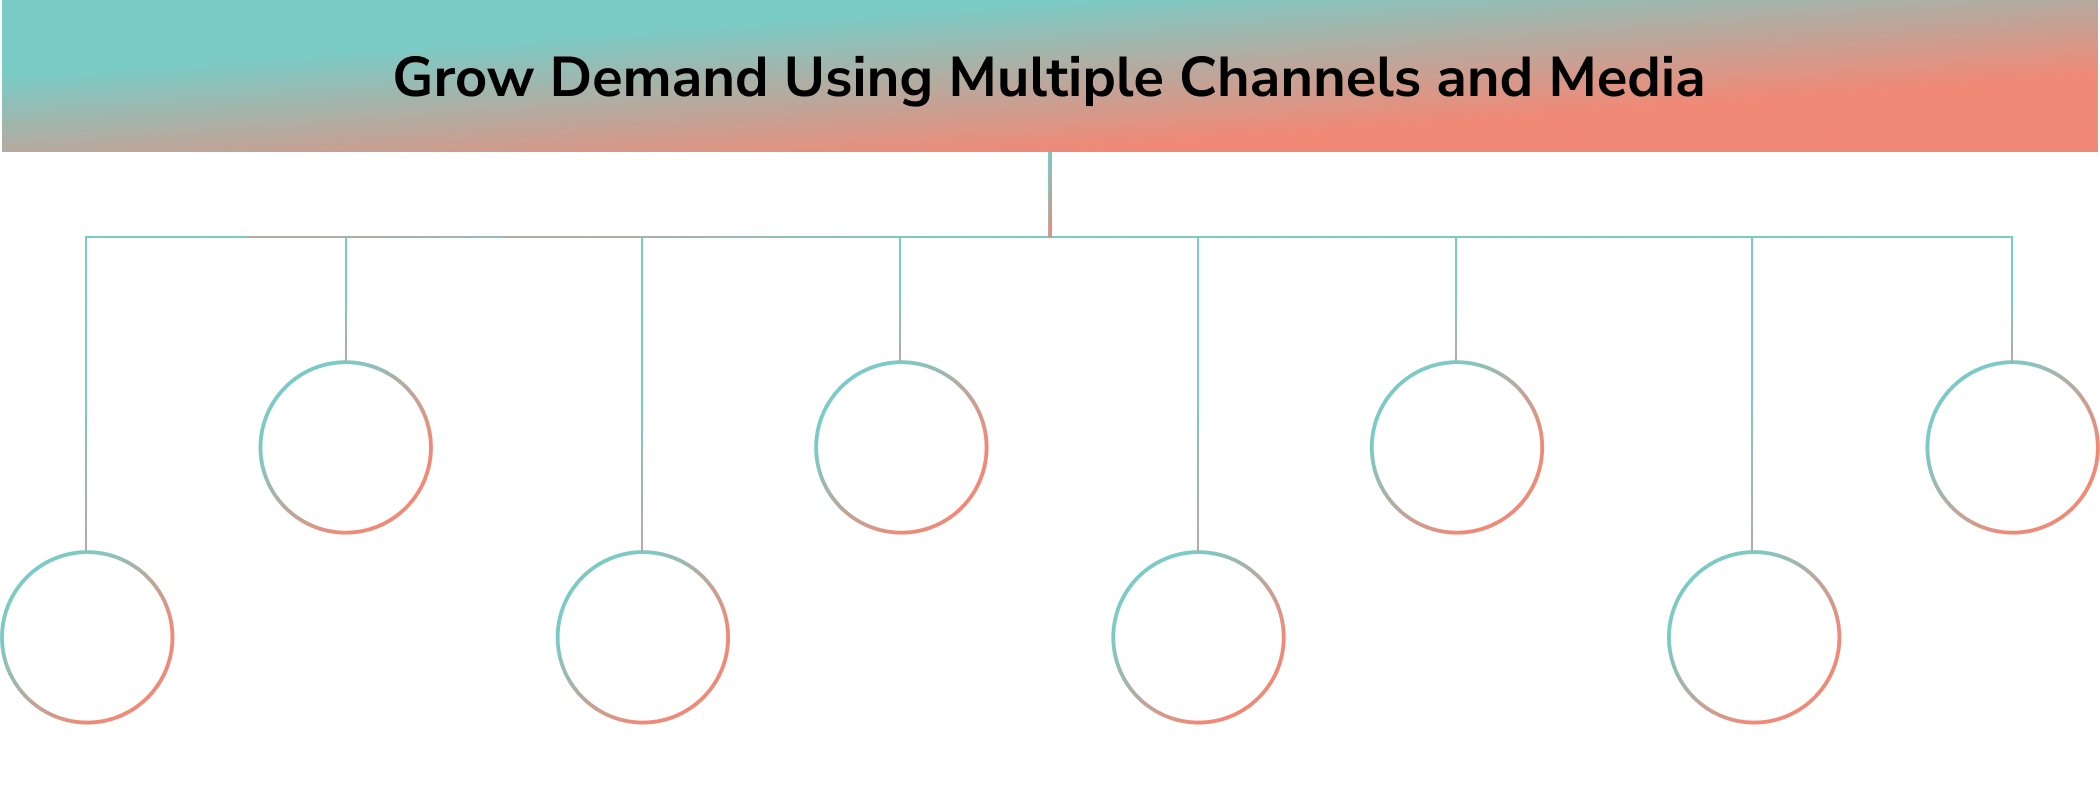 Grow demand using multiple channels and media.